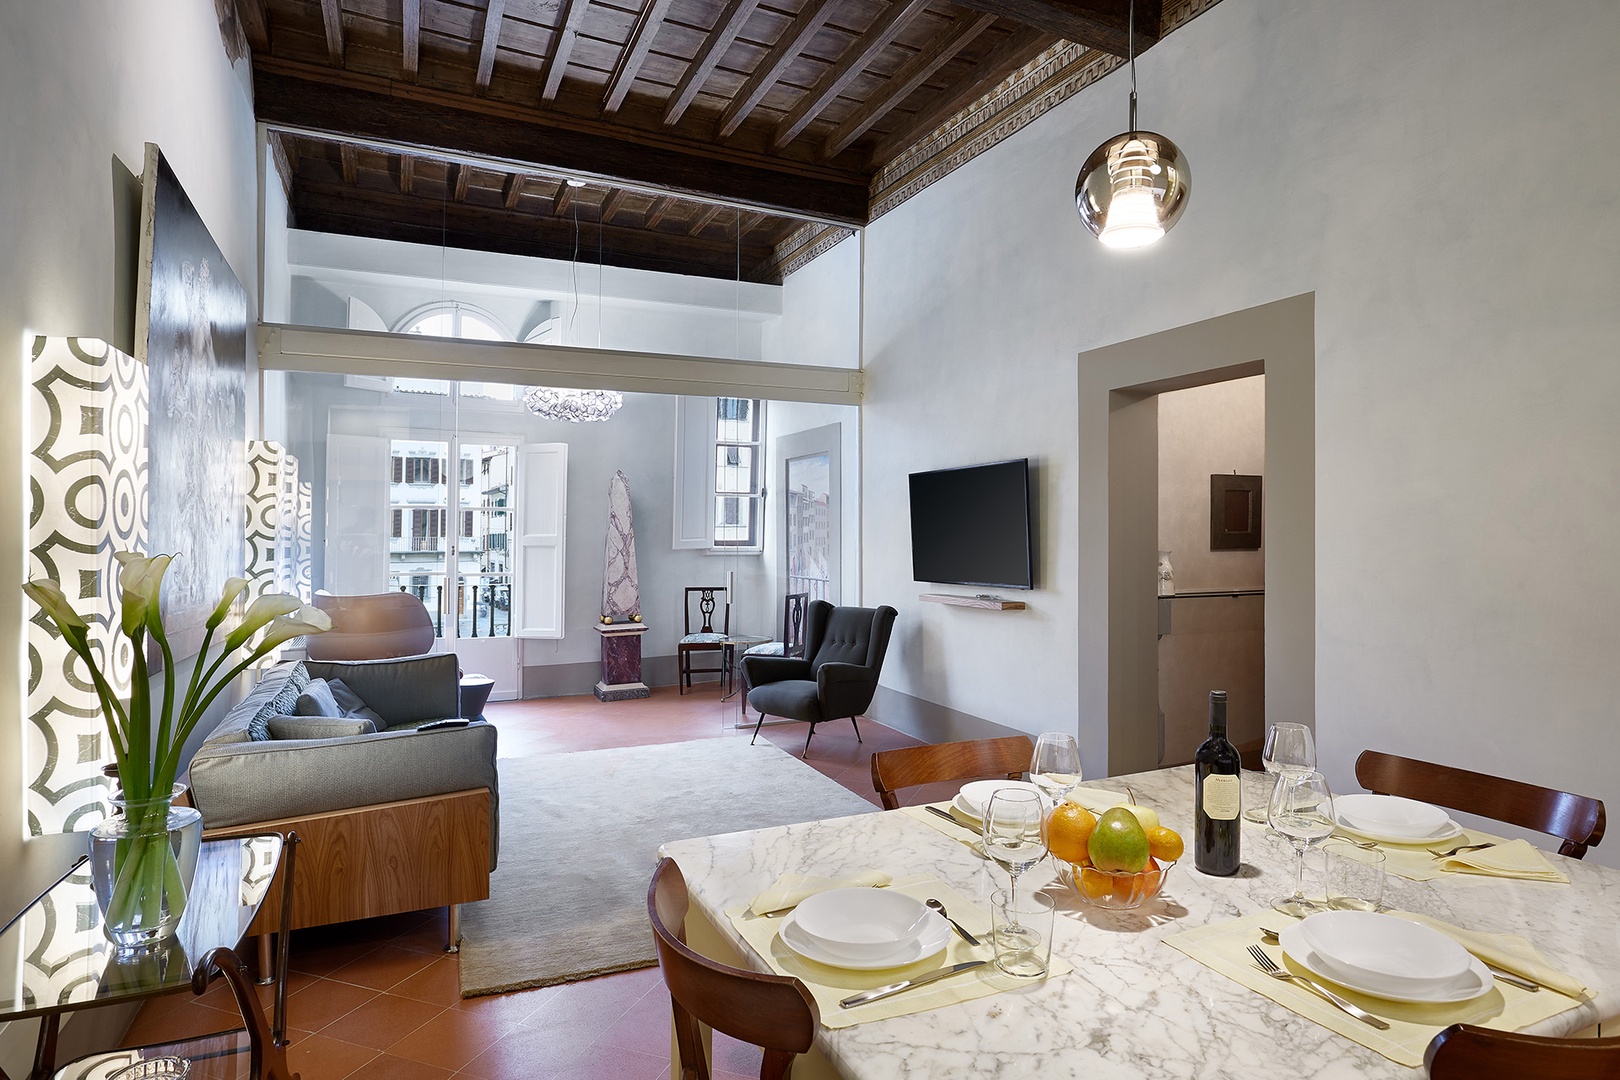 Paradiso's living room is roomy and welcoming. It overlooks the historical Piazza Santa Croce.